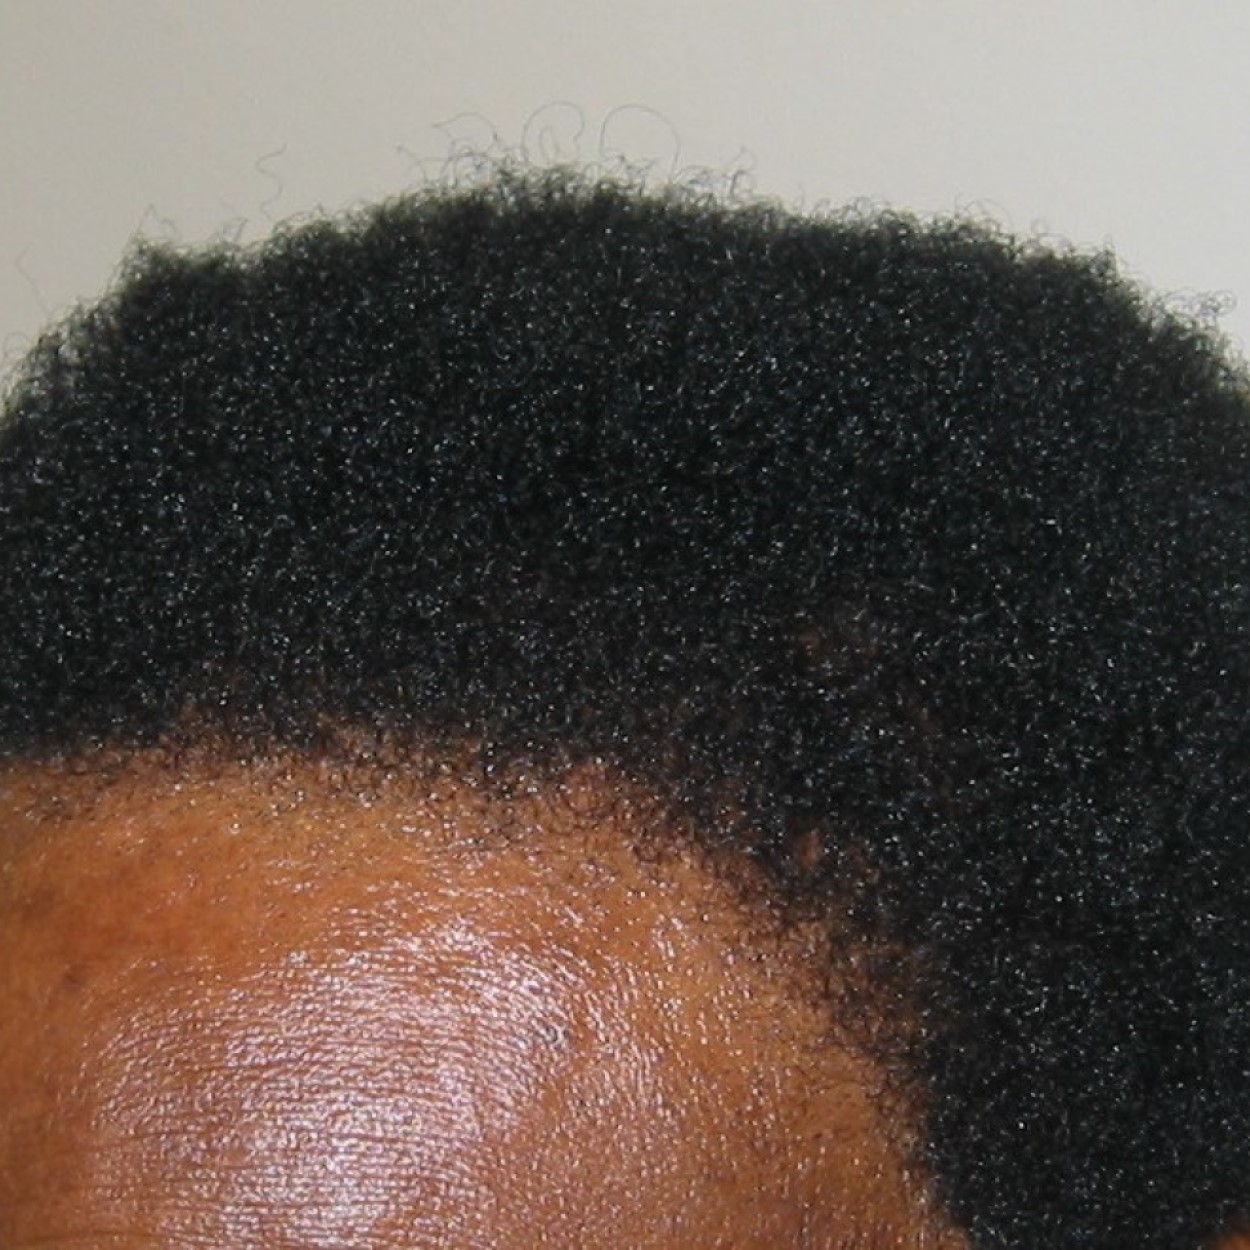 Hair Transplant Timeline: Preparation, Recovery & Results